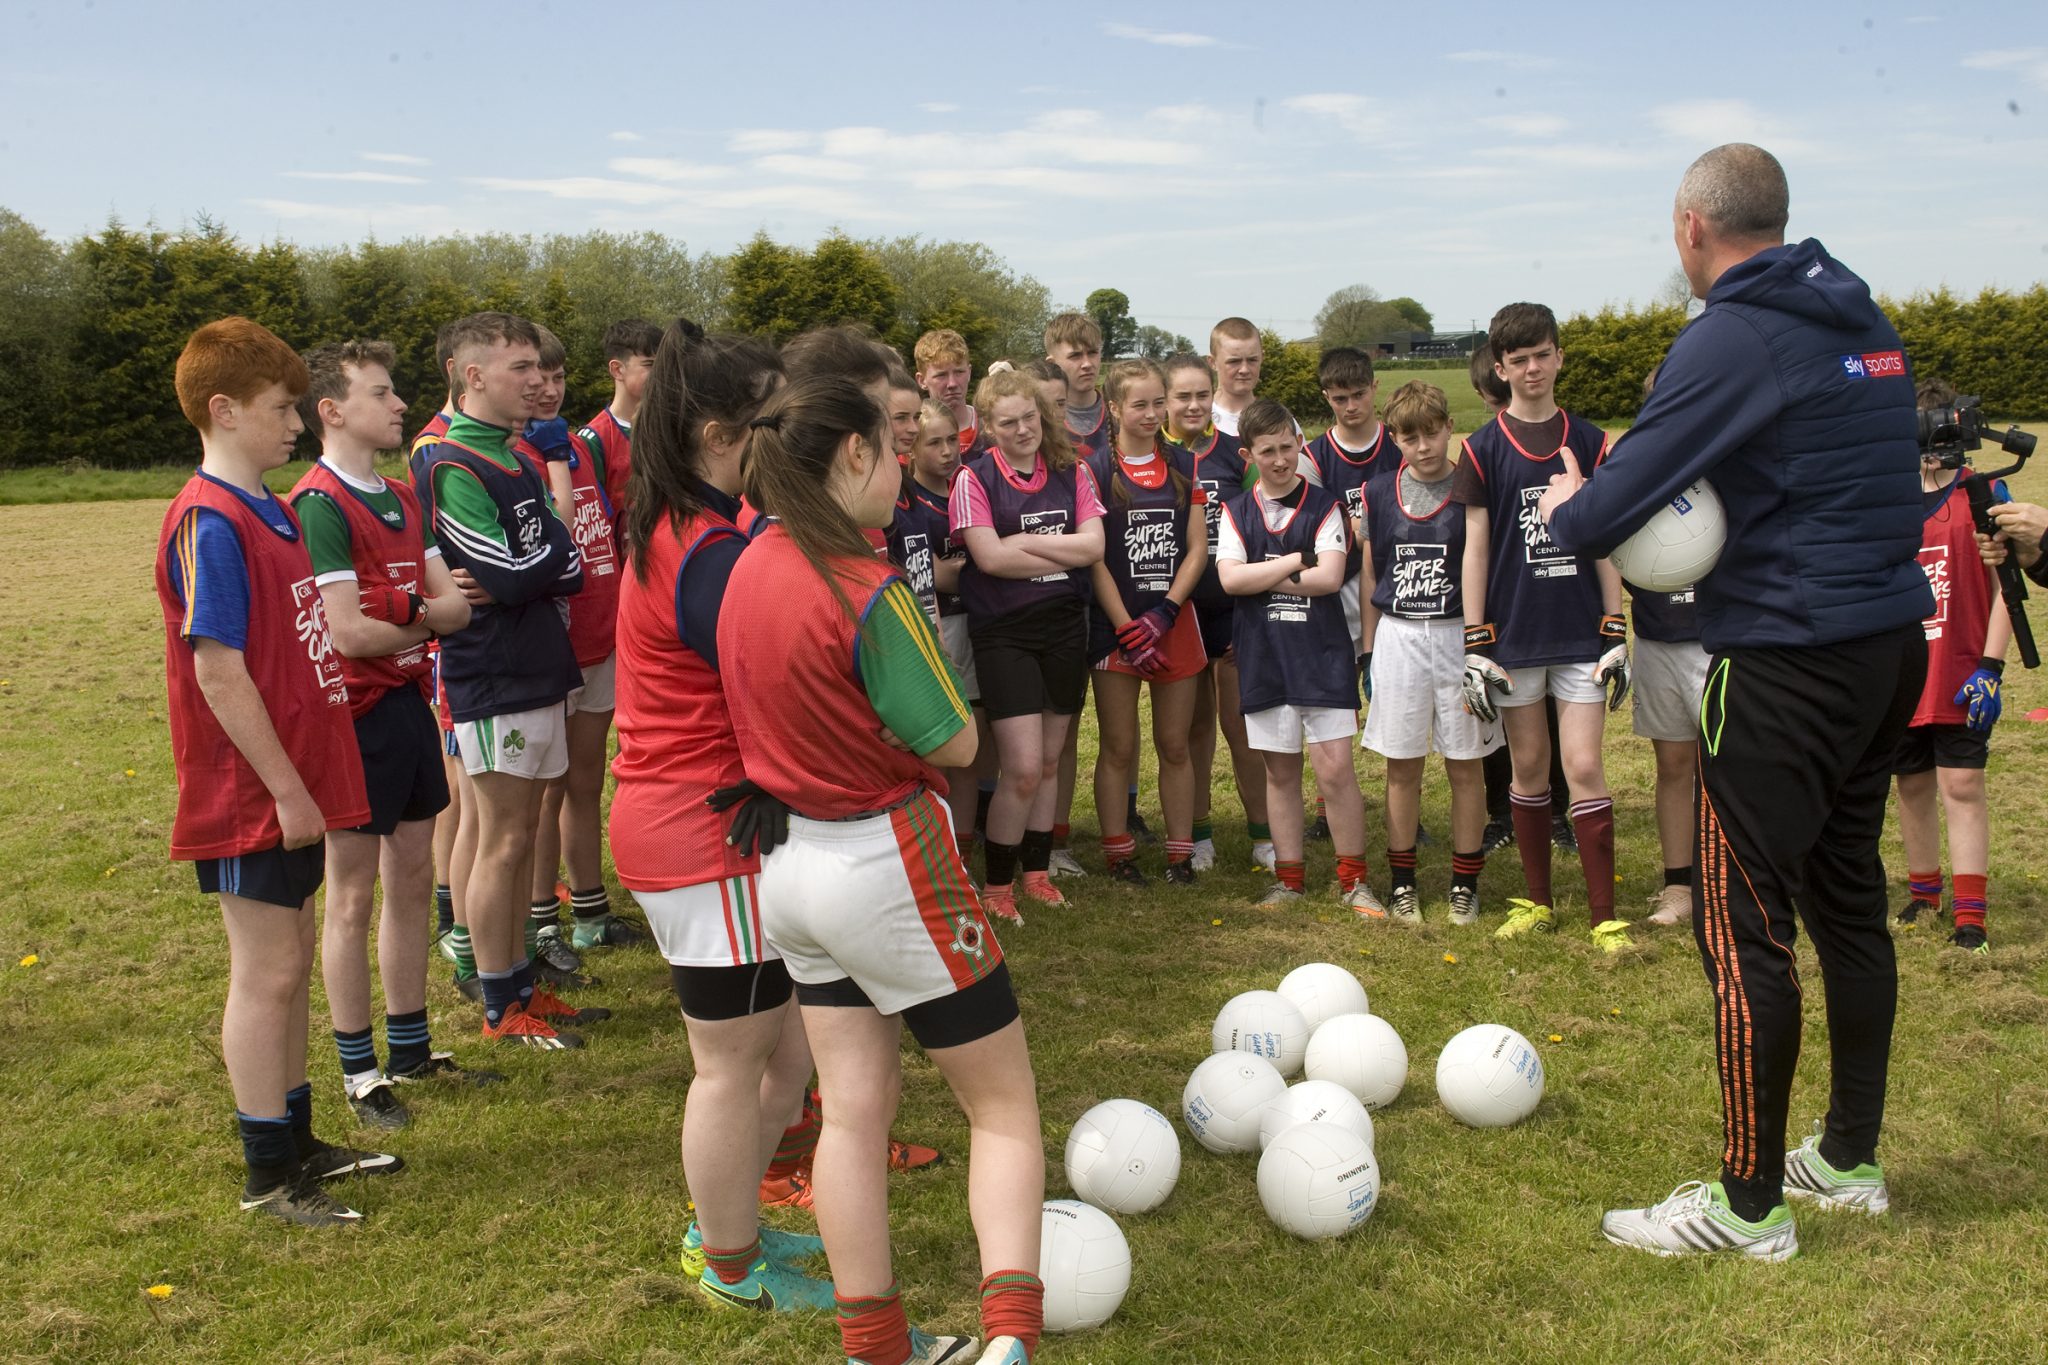 Kieran Donaghy is on a mission to keep Gaelic Games alive among teenagers